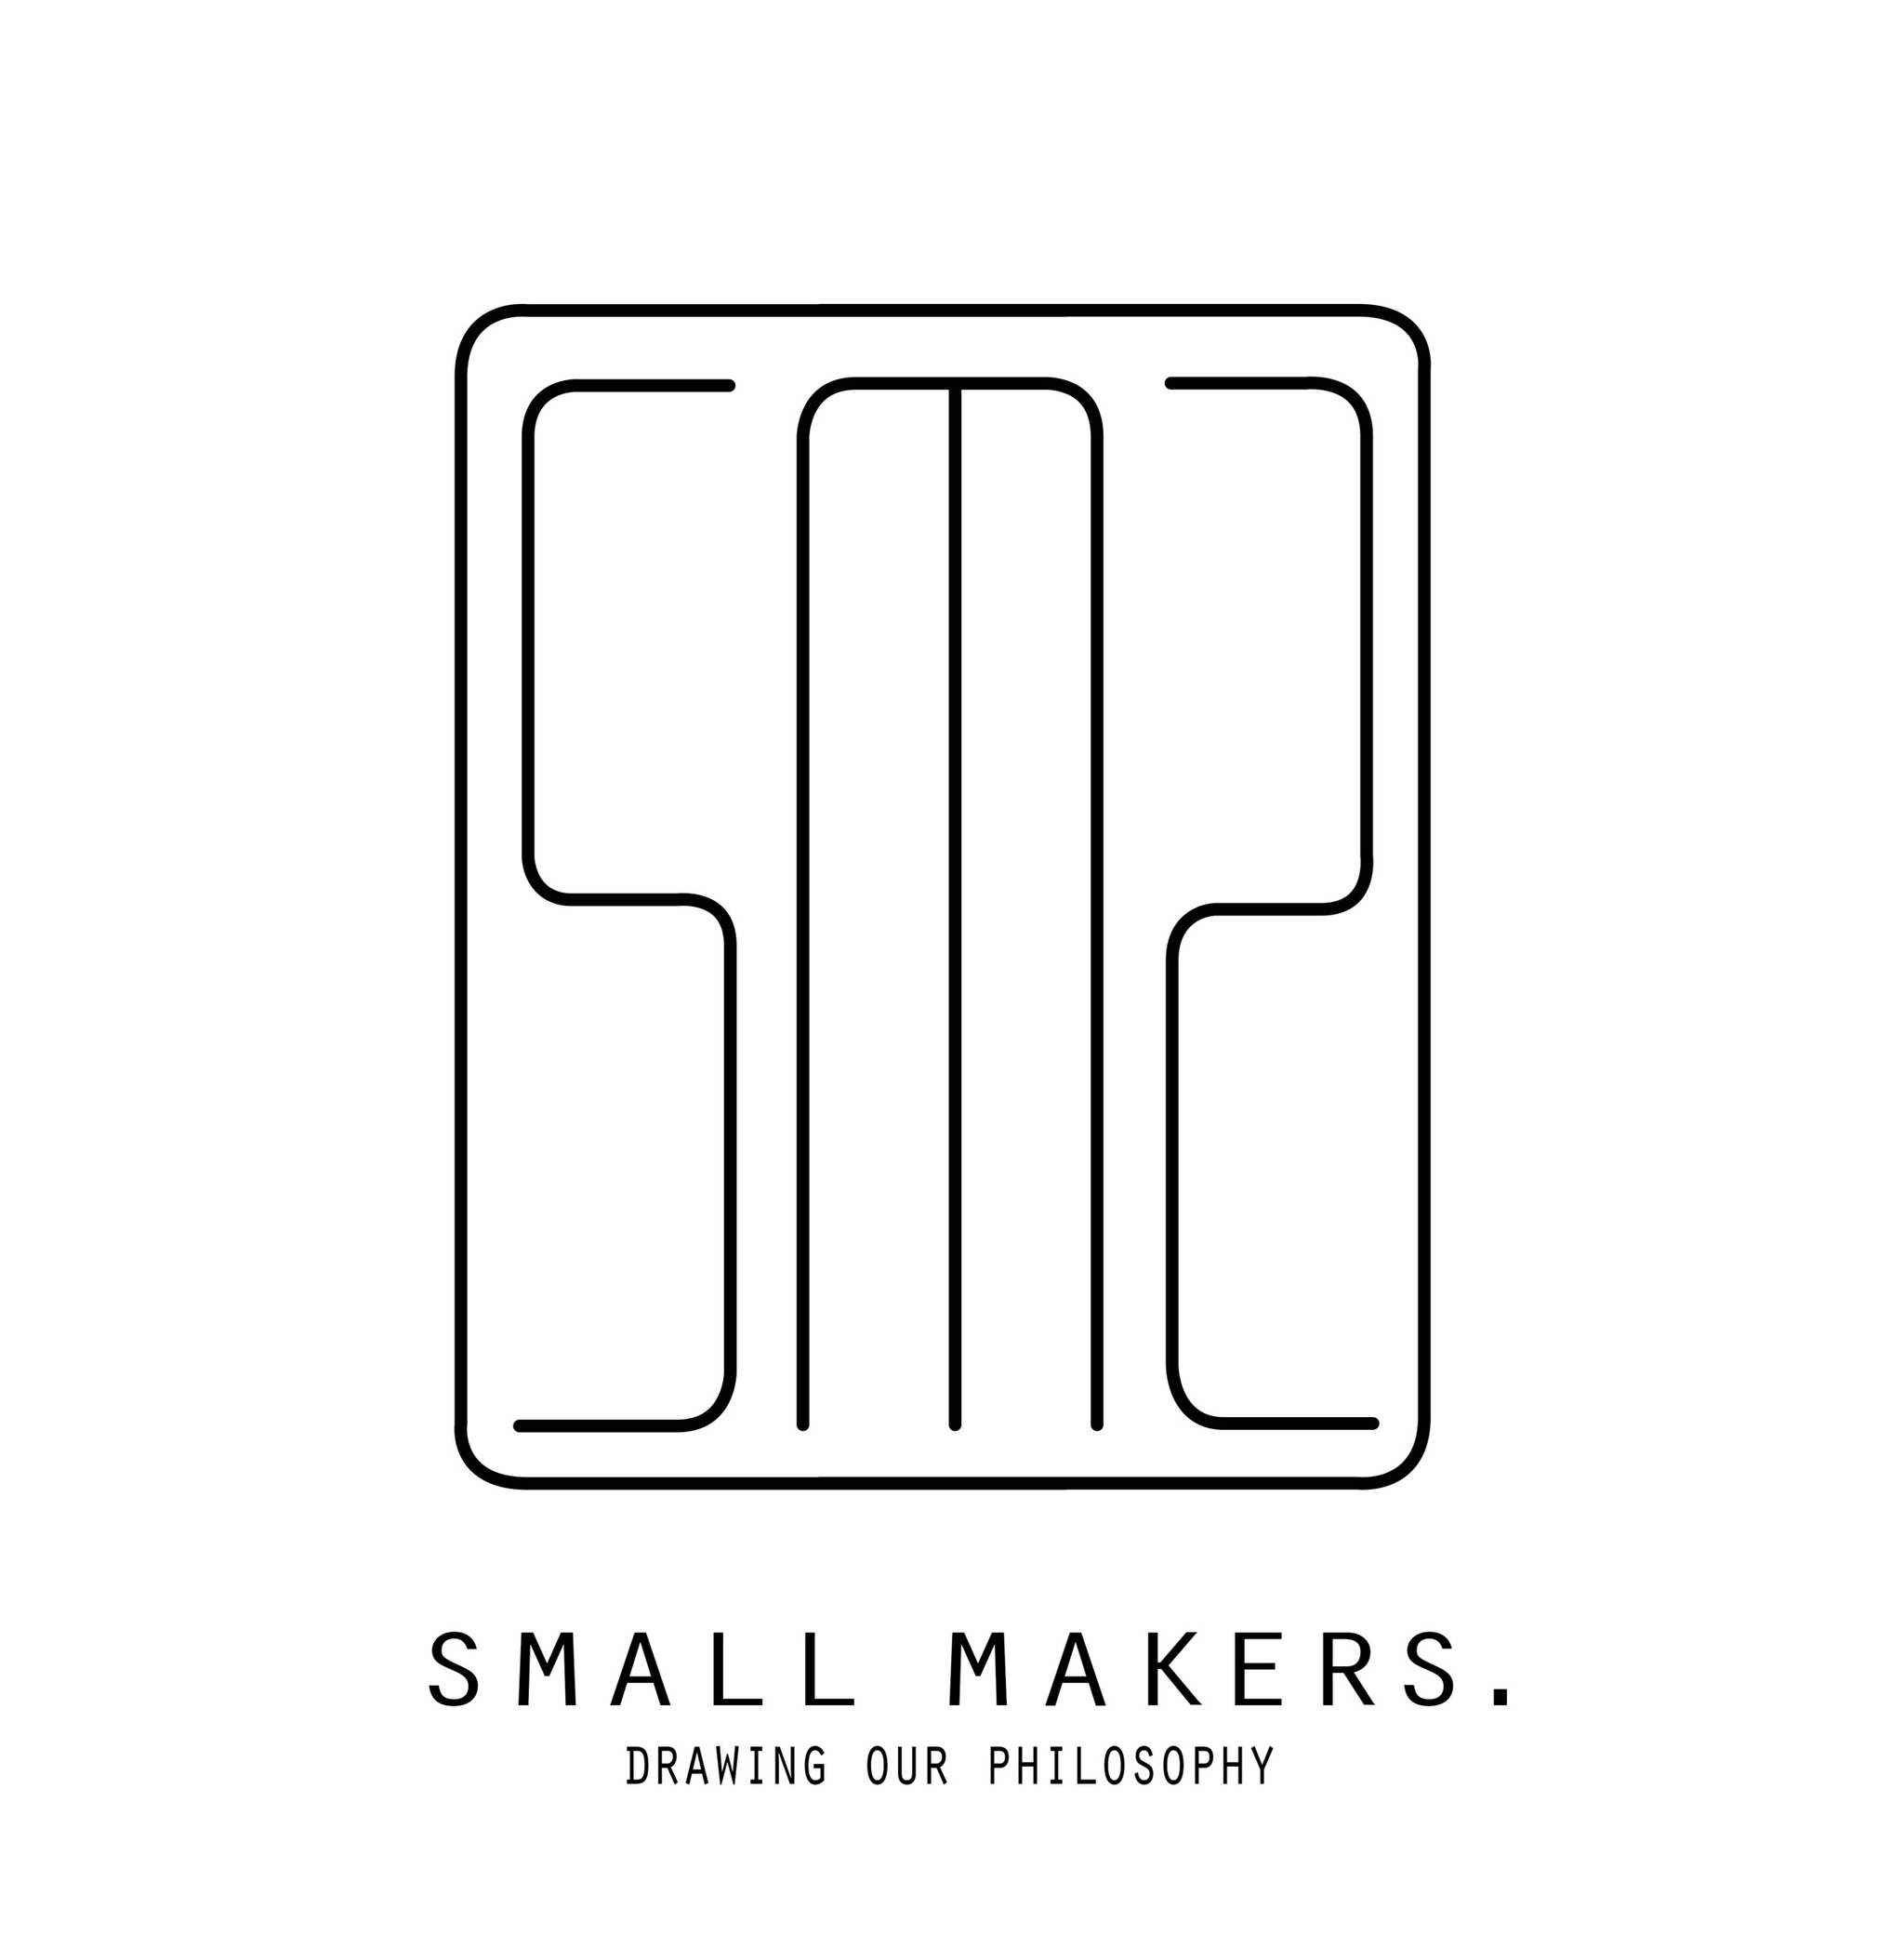 SMALL MAKERS